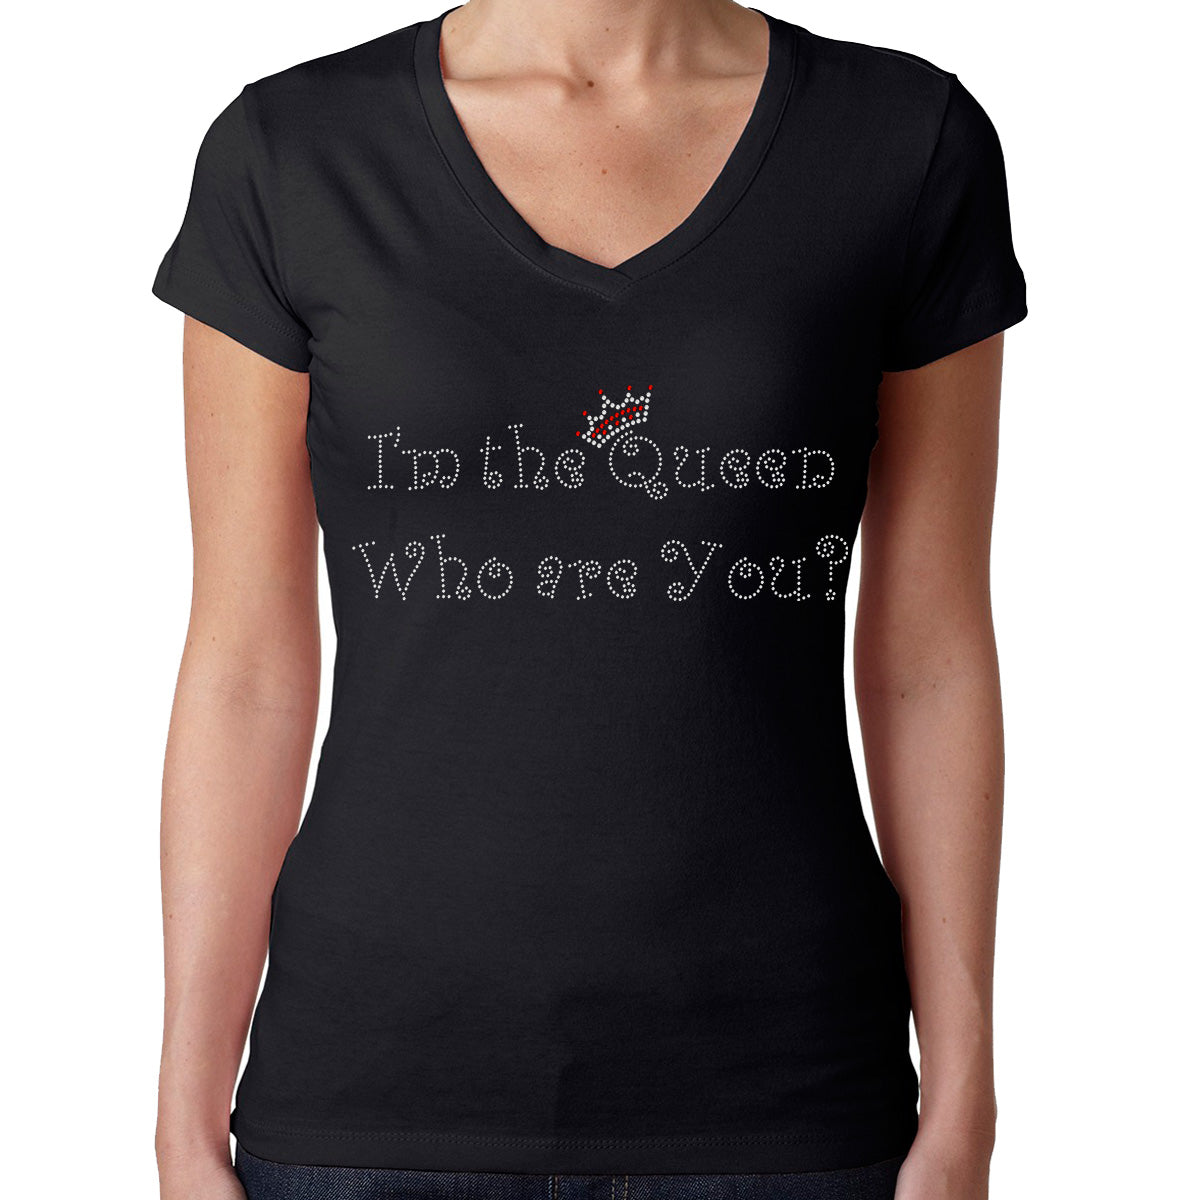 Womens T-Shirt Rhinestone Bling Black Fitted Tee I'm the Queen Who are you